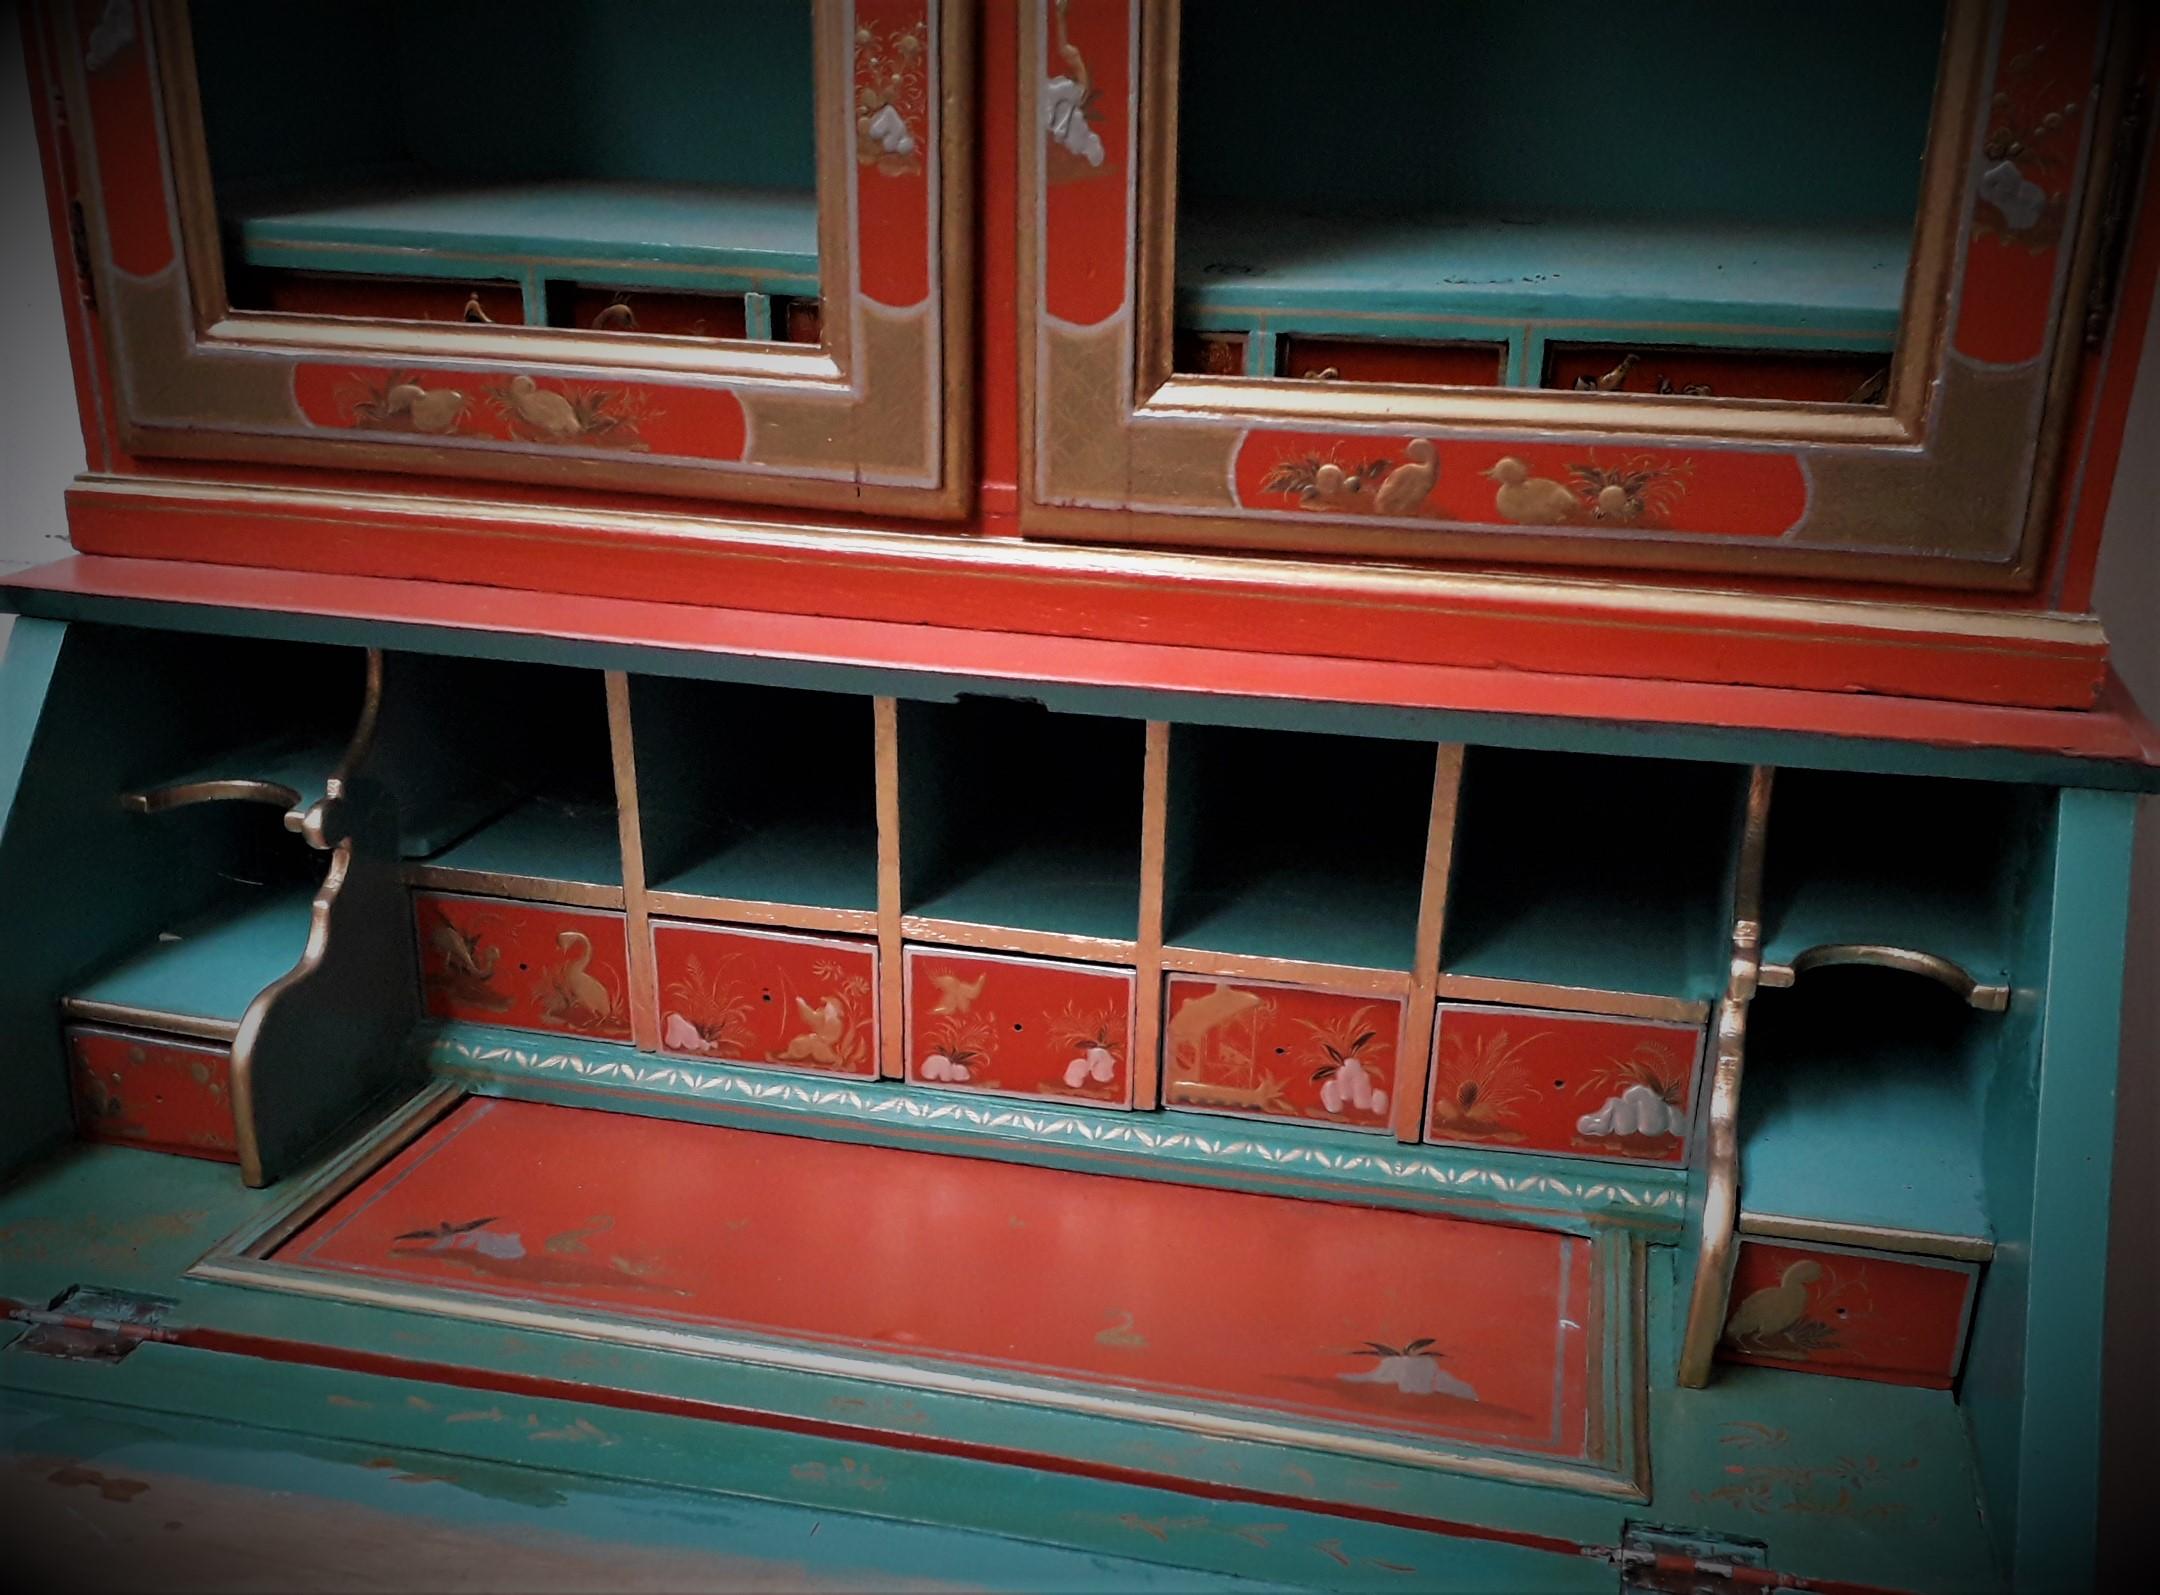 Chinoiserie Red Lacquer Bureau Bookcase.

The shelved upper part with double broken arched doors opening to reveal a part fitted interior with lower small drawers, more Chinoiserie scenes decorate the fitted bureau interior with a slide top hidden